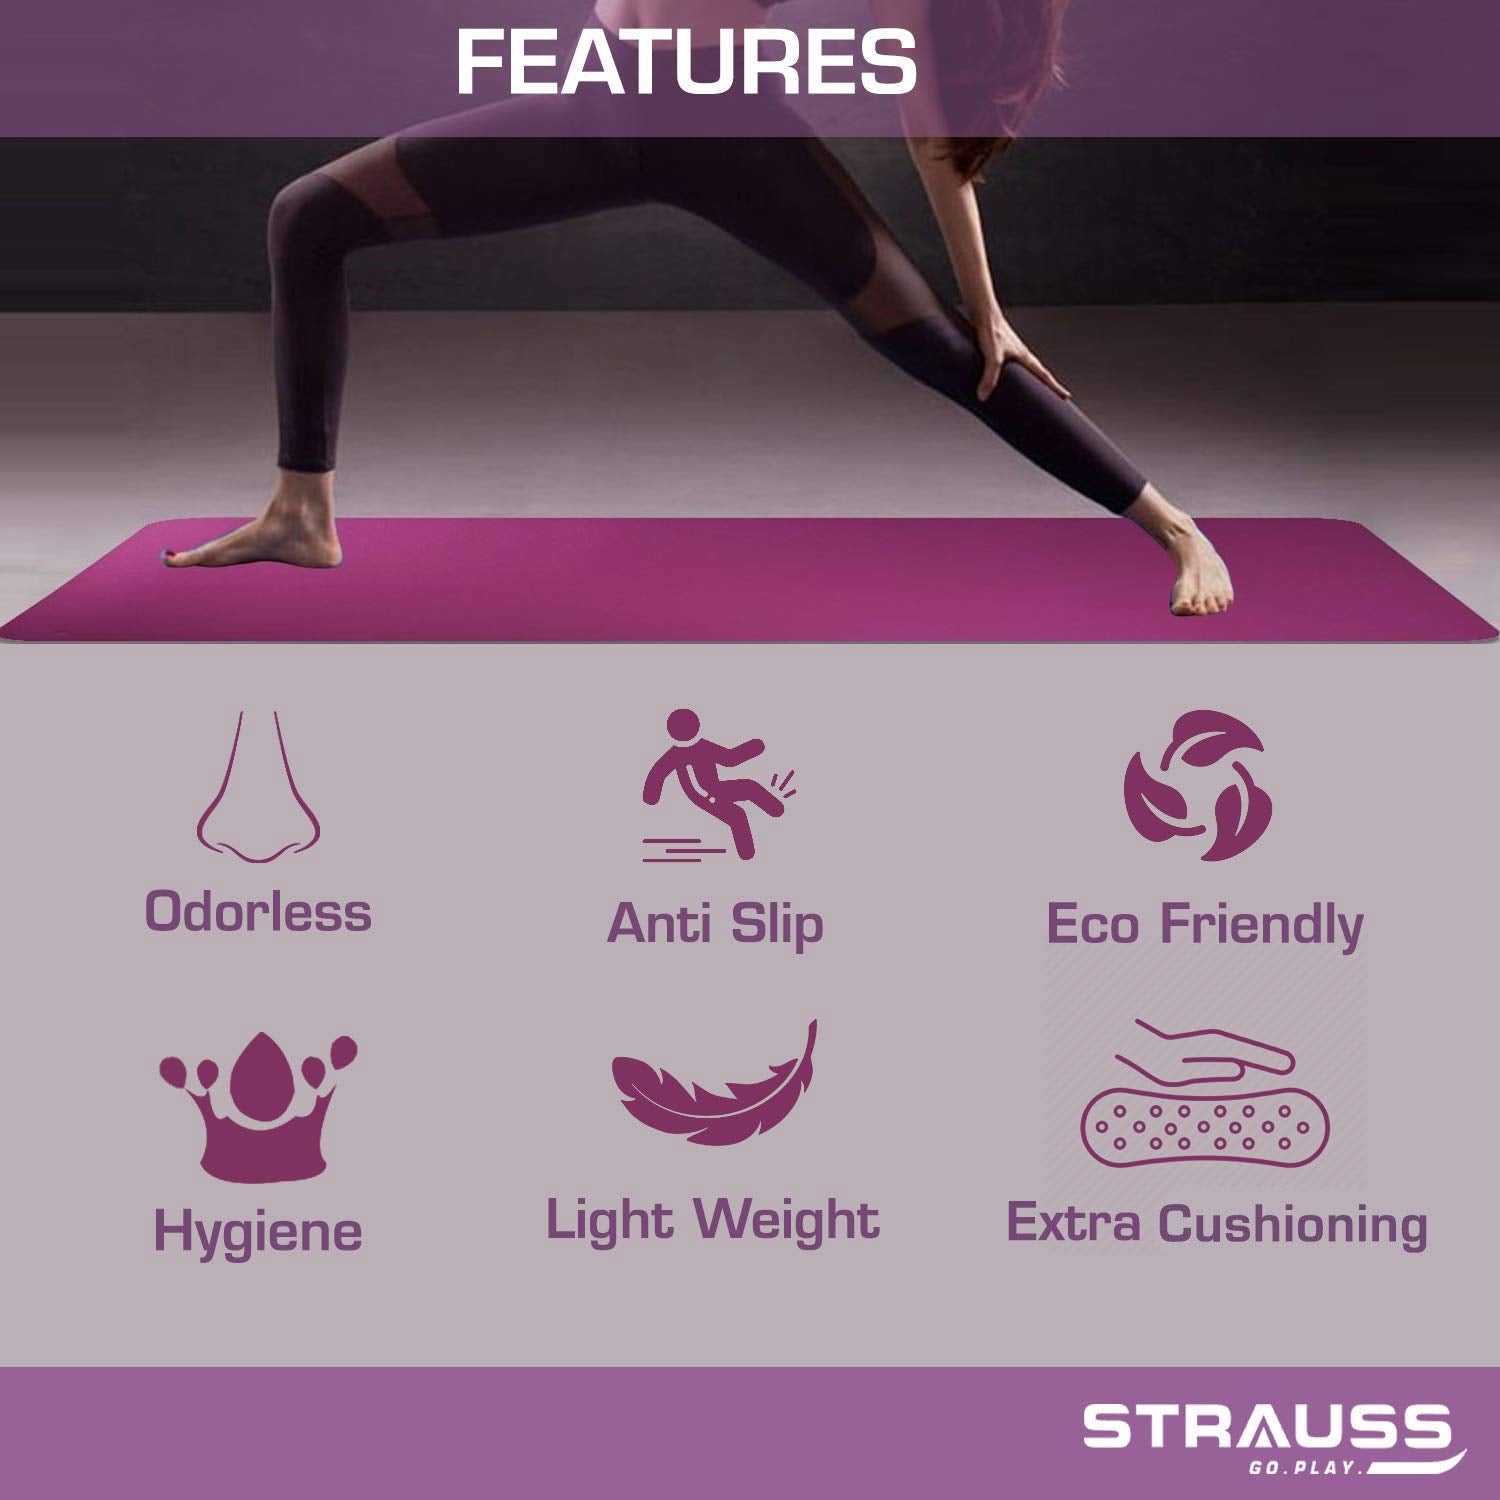 Strauss TPE Eco Friendly Dual Layer Yoga Mat, 6 mm (Pink) and Yoga Mat Strap, (Purple)